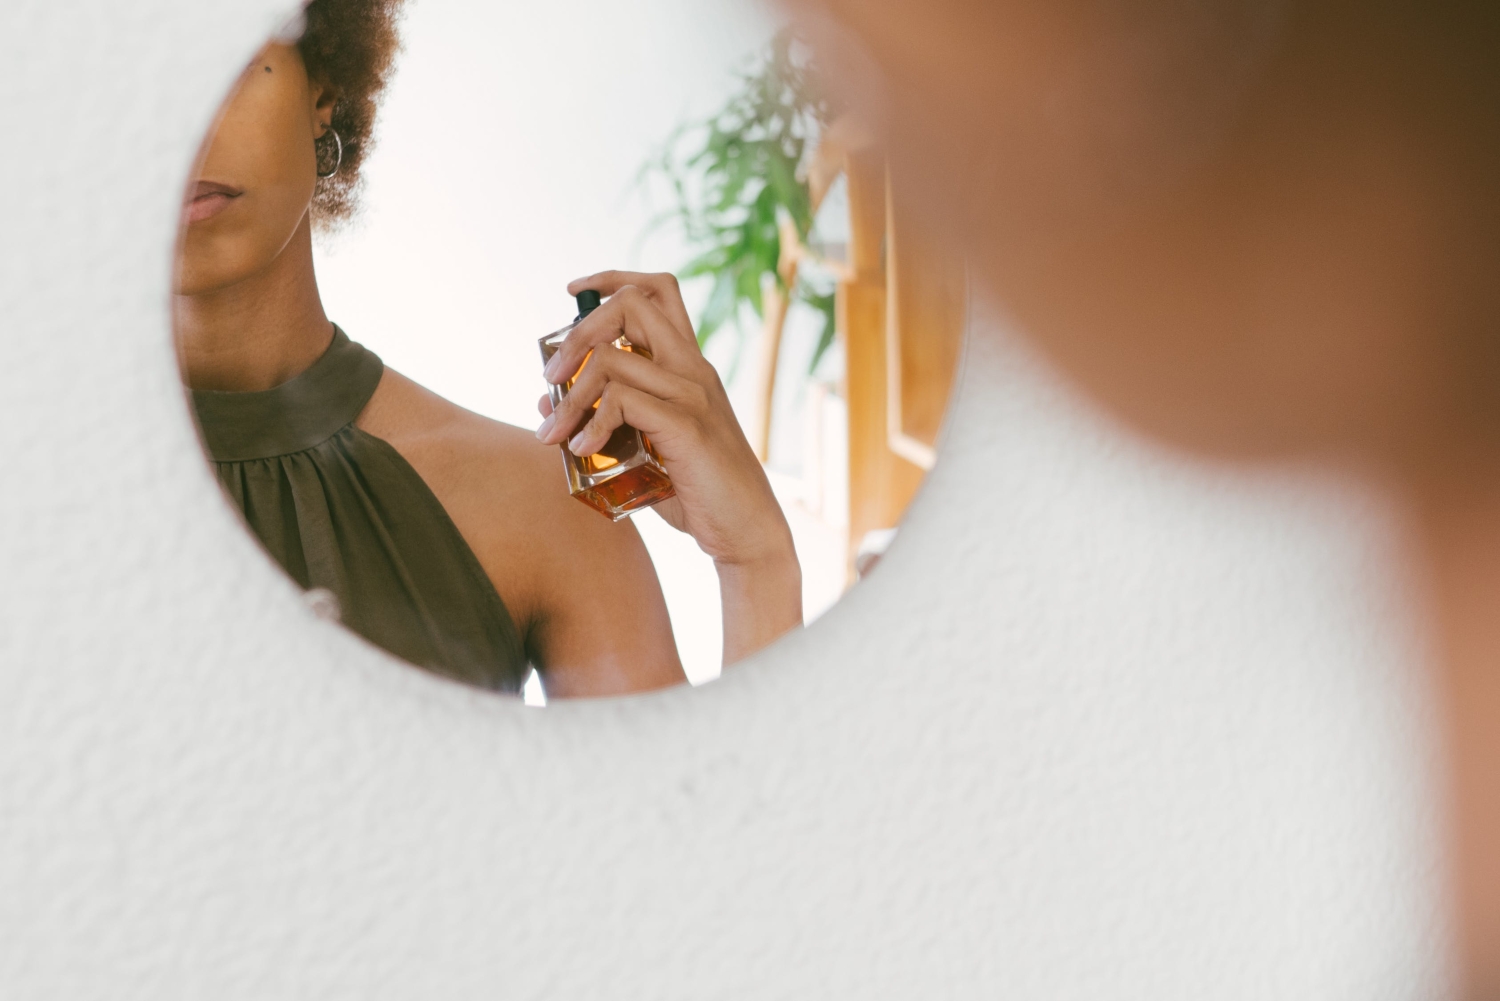 a reflection of a woman who uses perfume